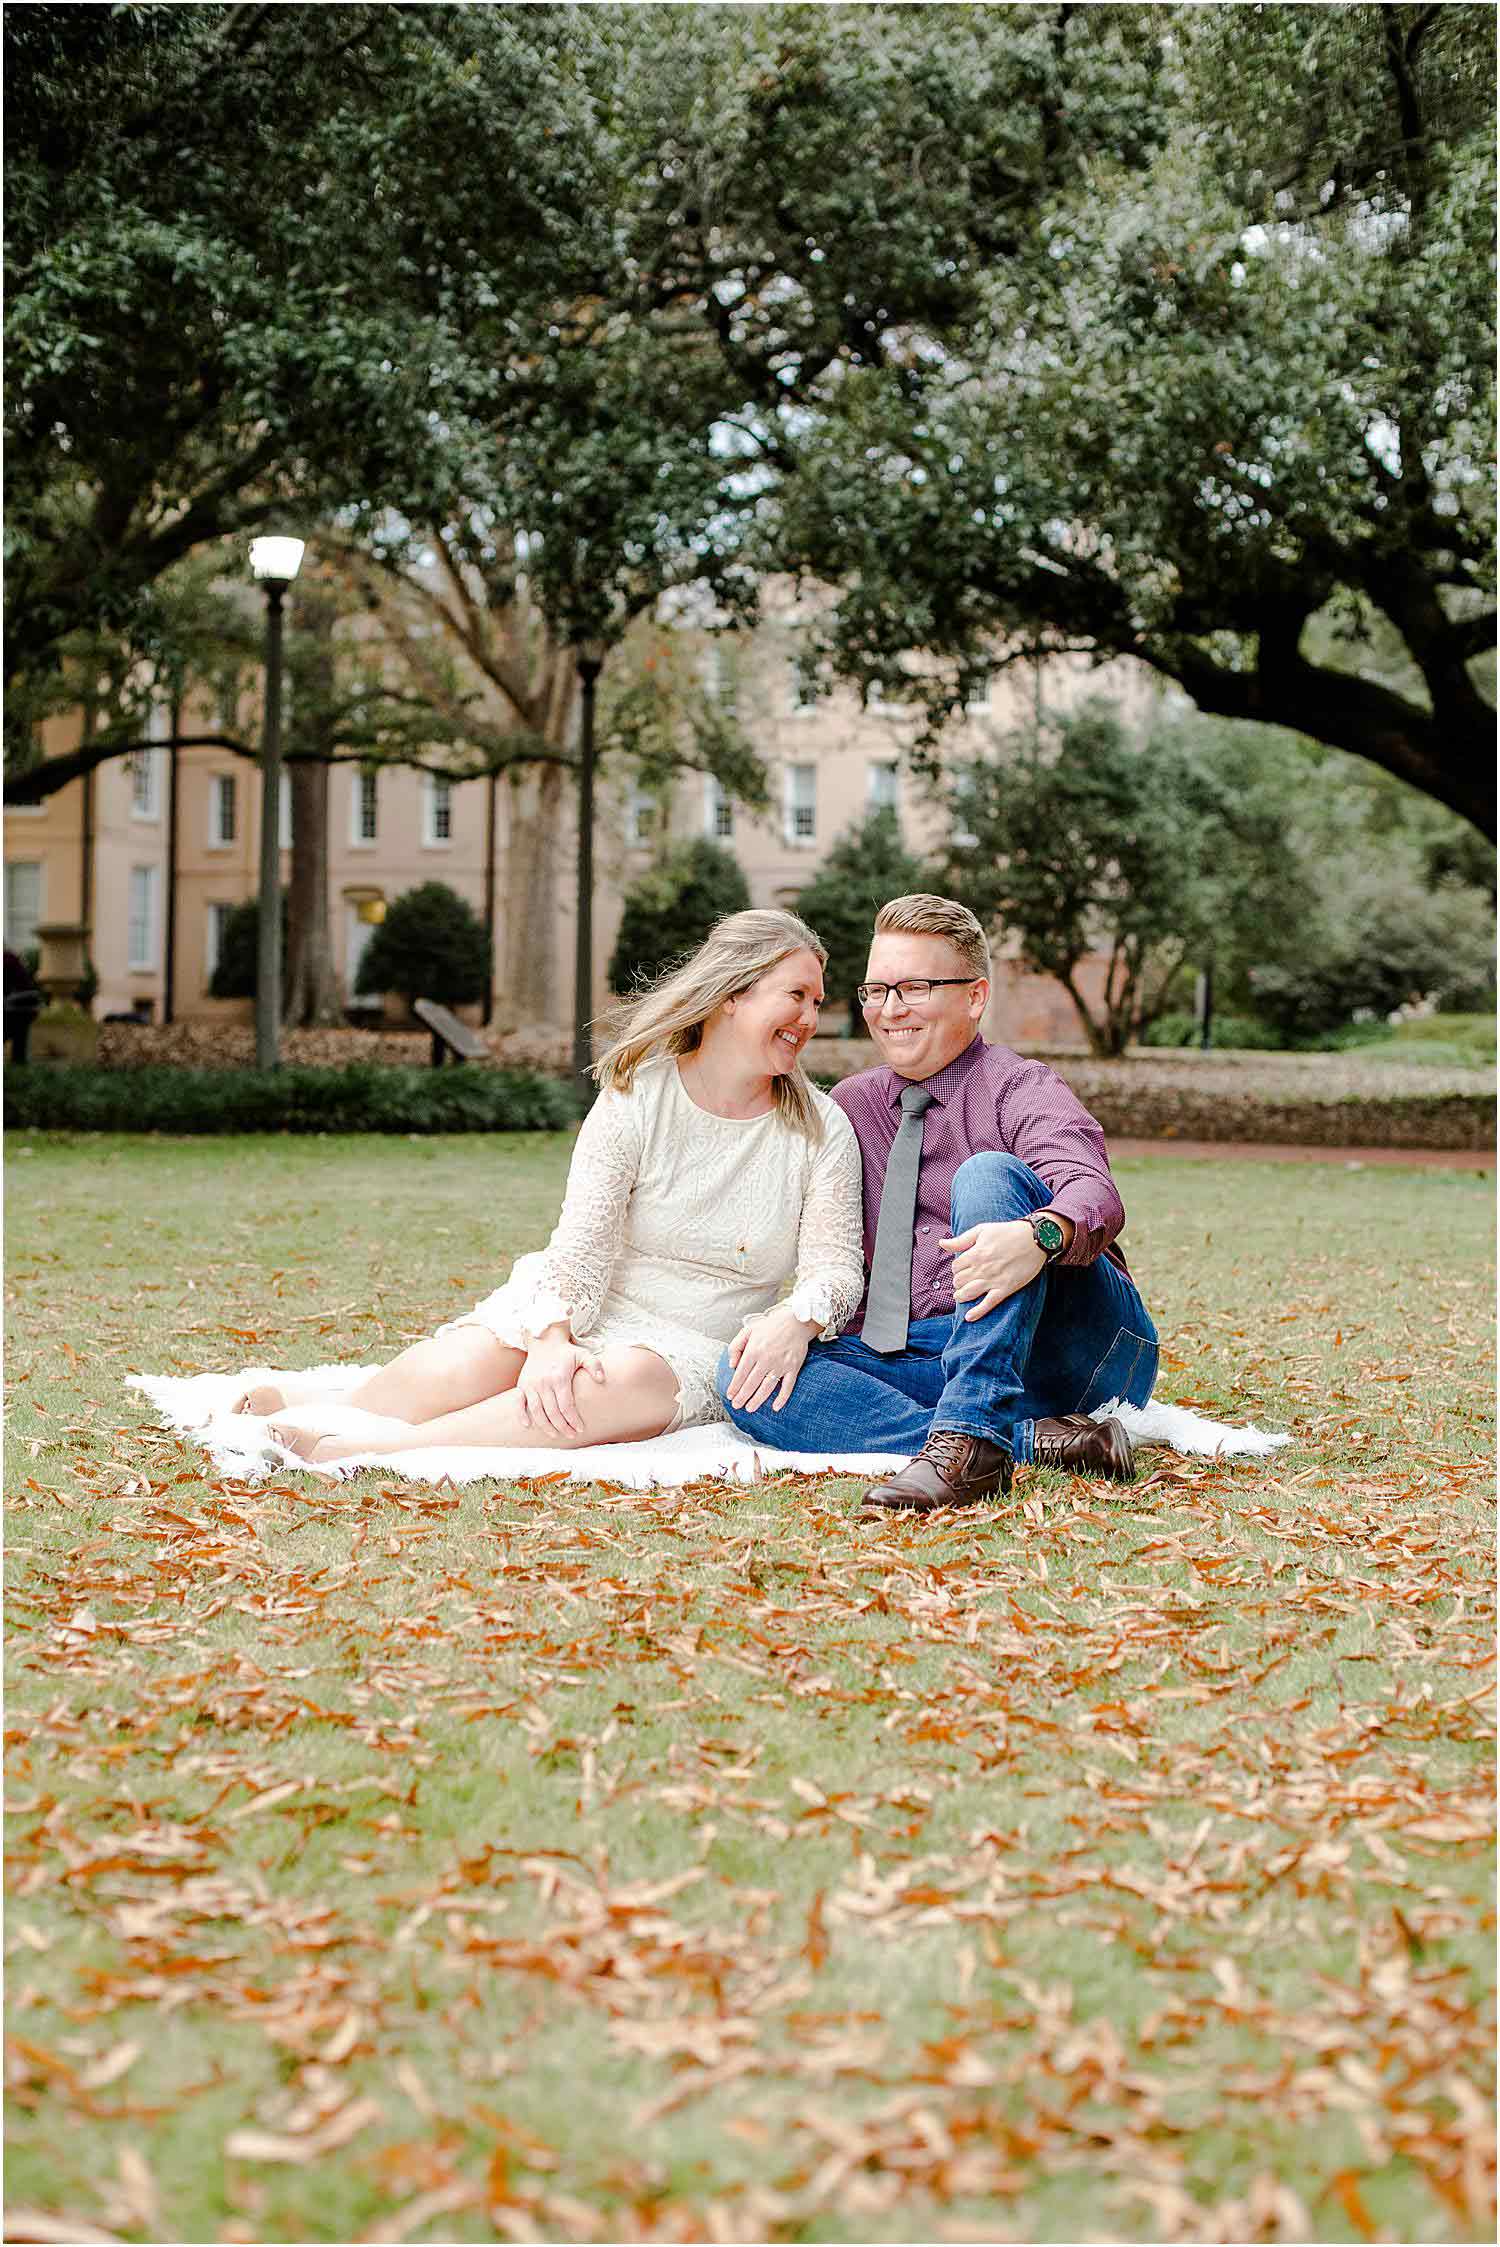 South Carolina engagement photography by Kate Cherry Photography, LLC